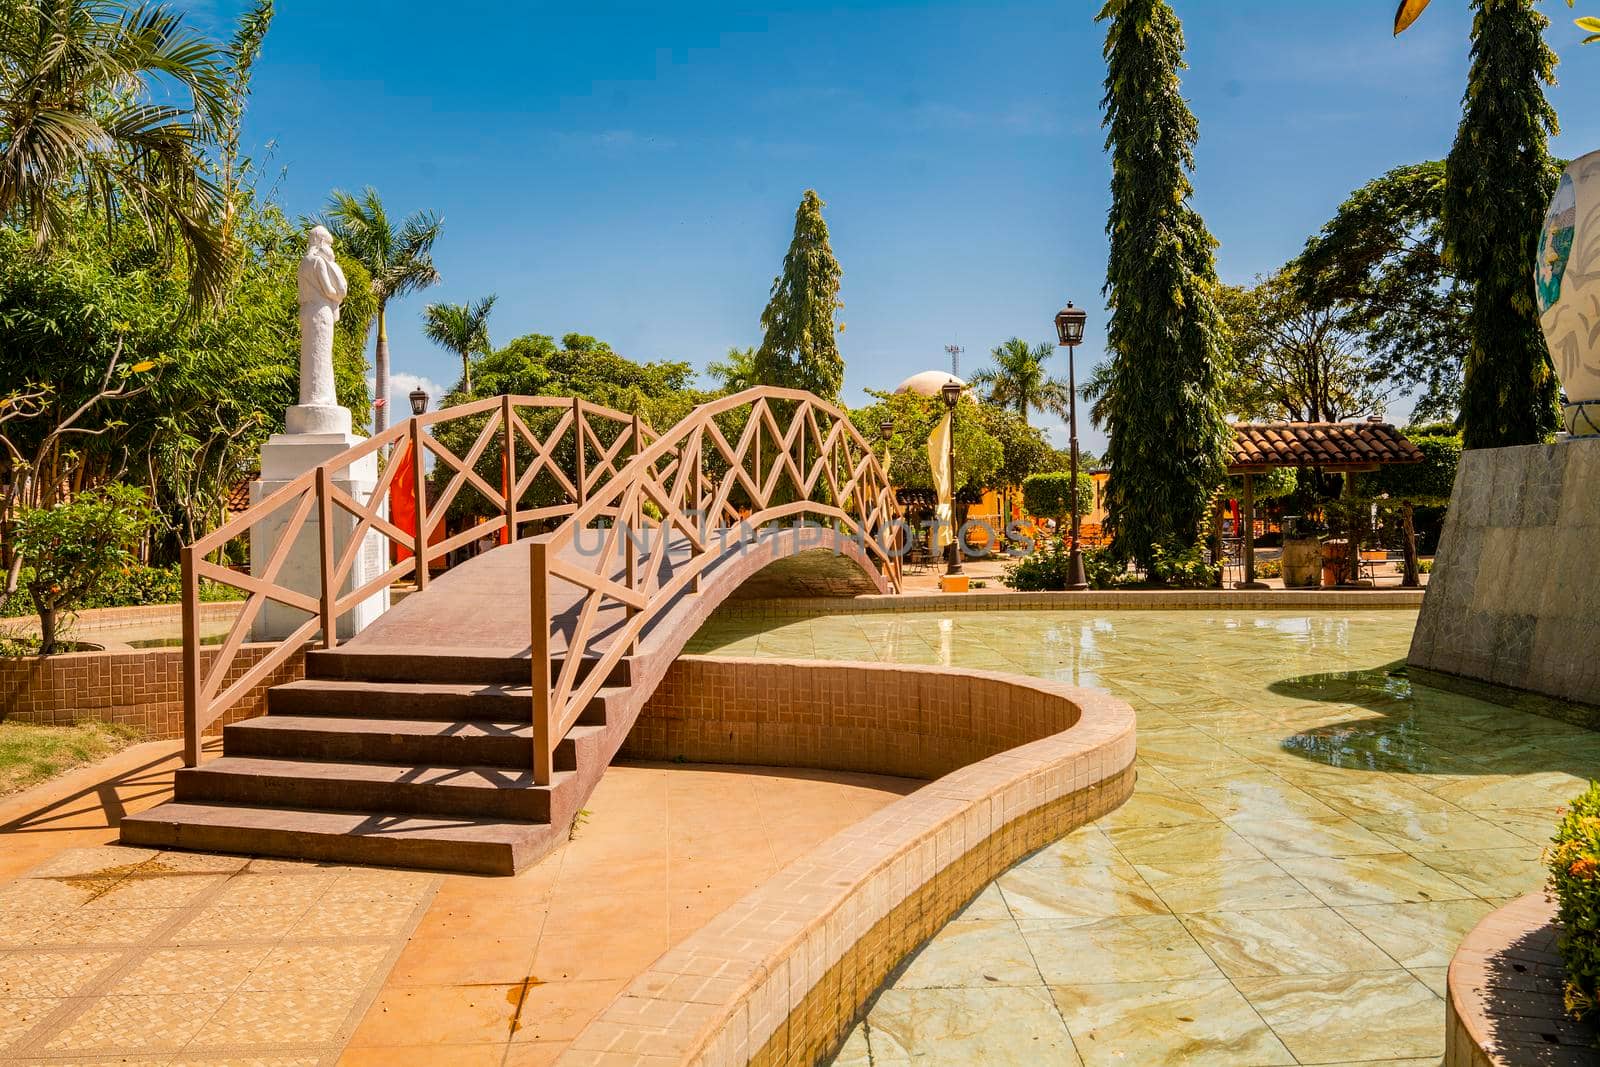 View of a calm park with a small wooden bridge over a water fountain. Nagarote central park.  Image of a nice and relaxed park with a water fountain surrounded by trees. Traditional park of Nagarote, Nicaragua by isaiphoto